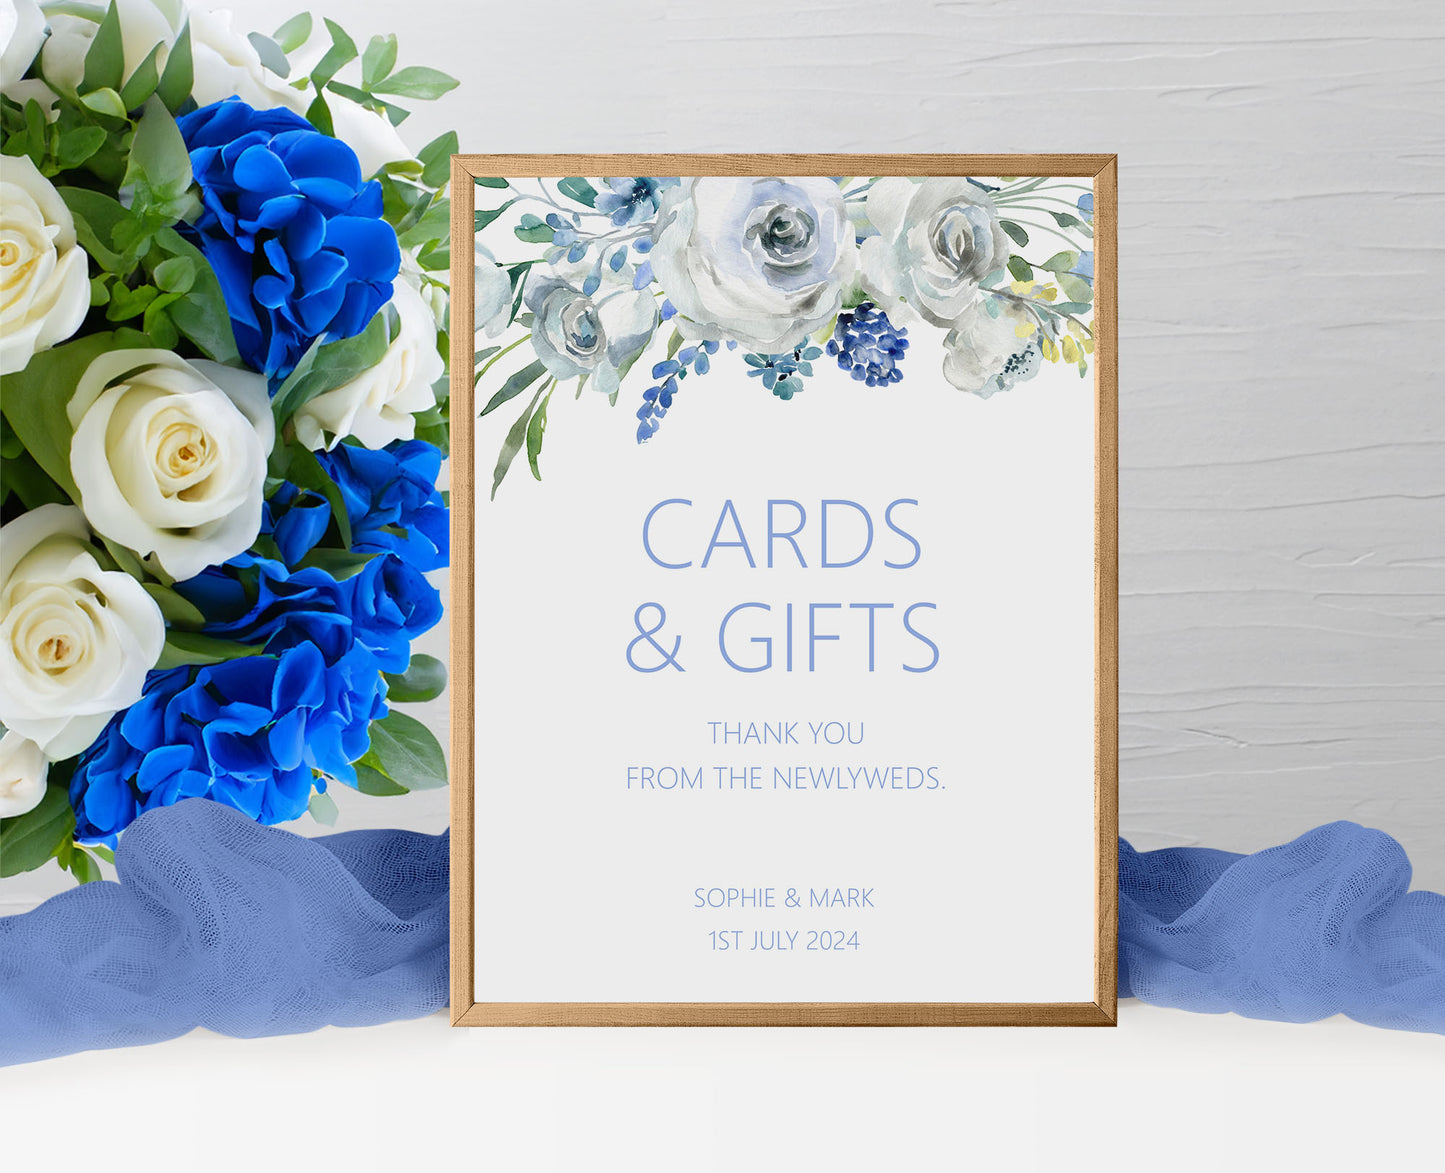 Cards & Gifts Wedding Sign - Blue Floral